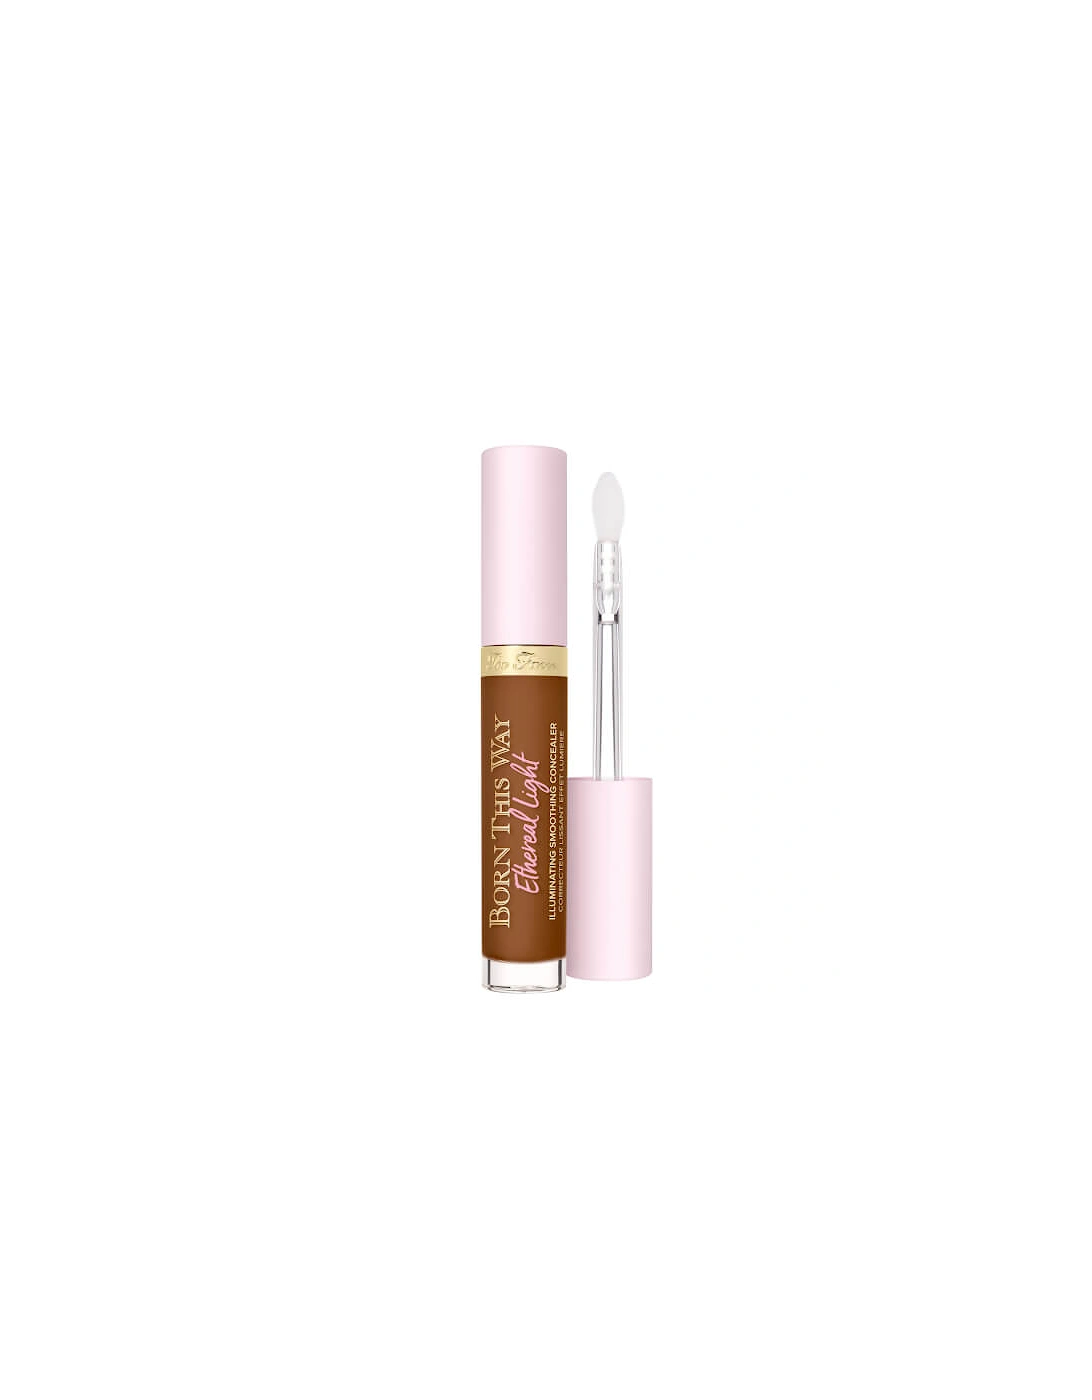 Born This Way Ethereal Light Illuminating Smoothing Concealer - Hot Cocoa, 2 of 1